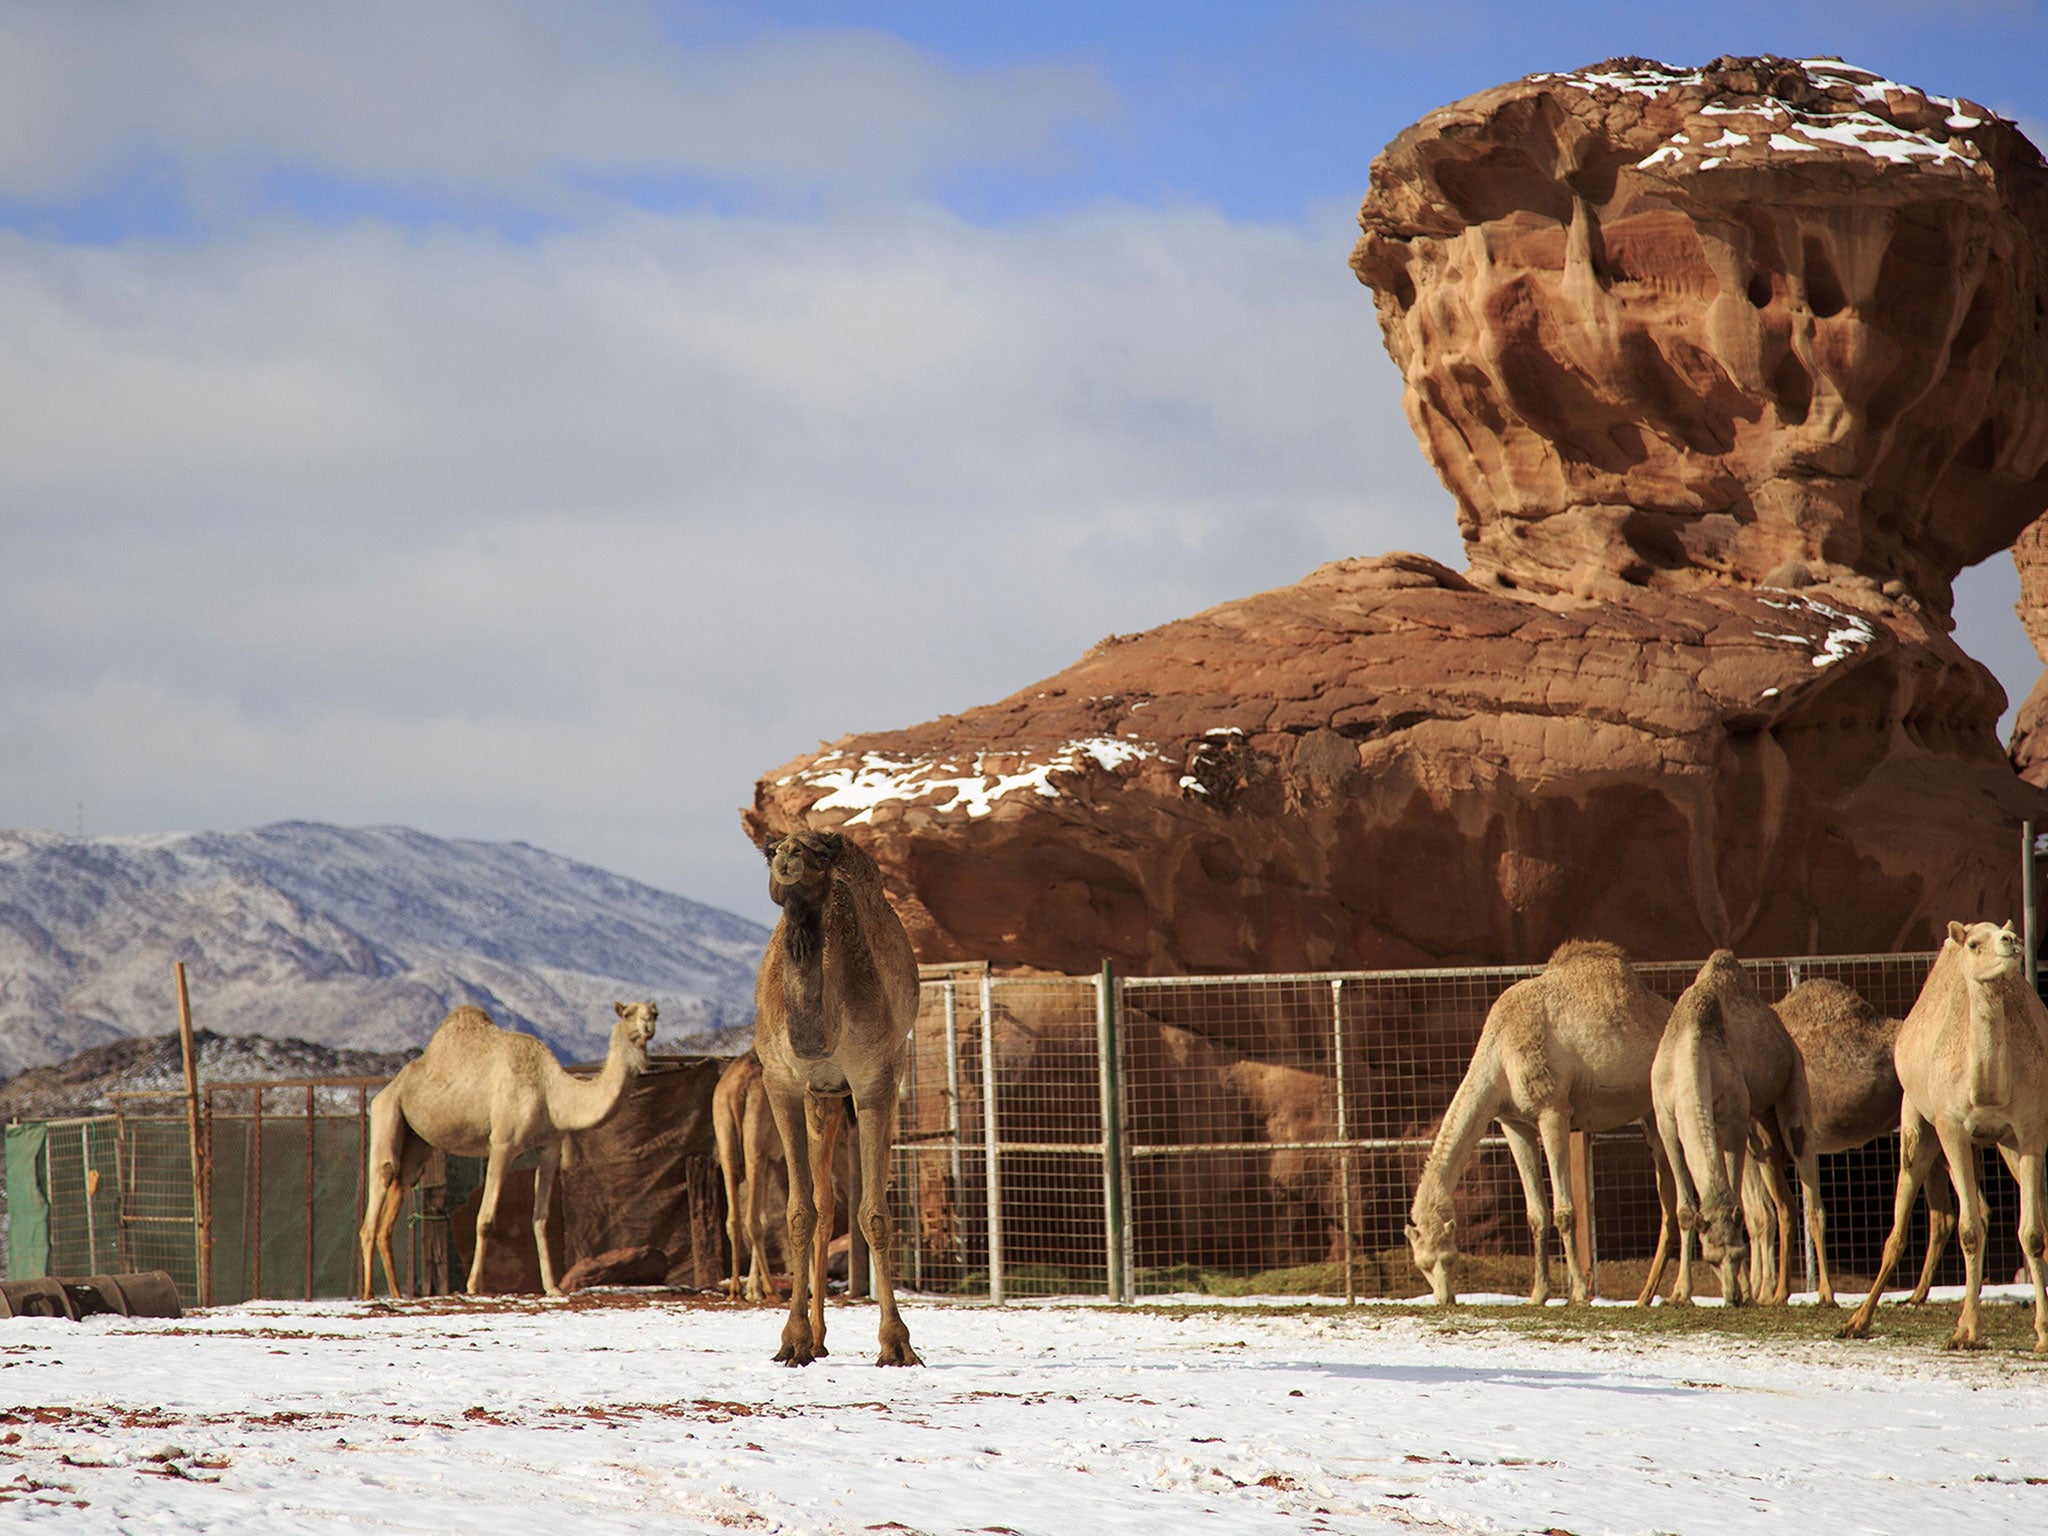 Camels stand in the snow in the Aleghan Heights, located some 1500 km northwest of the Saudi capital Riyadh in the Tabuk region, on January 10, 2015